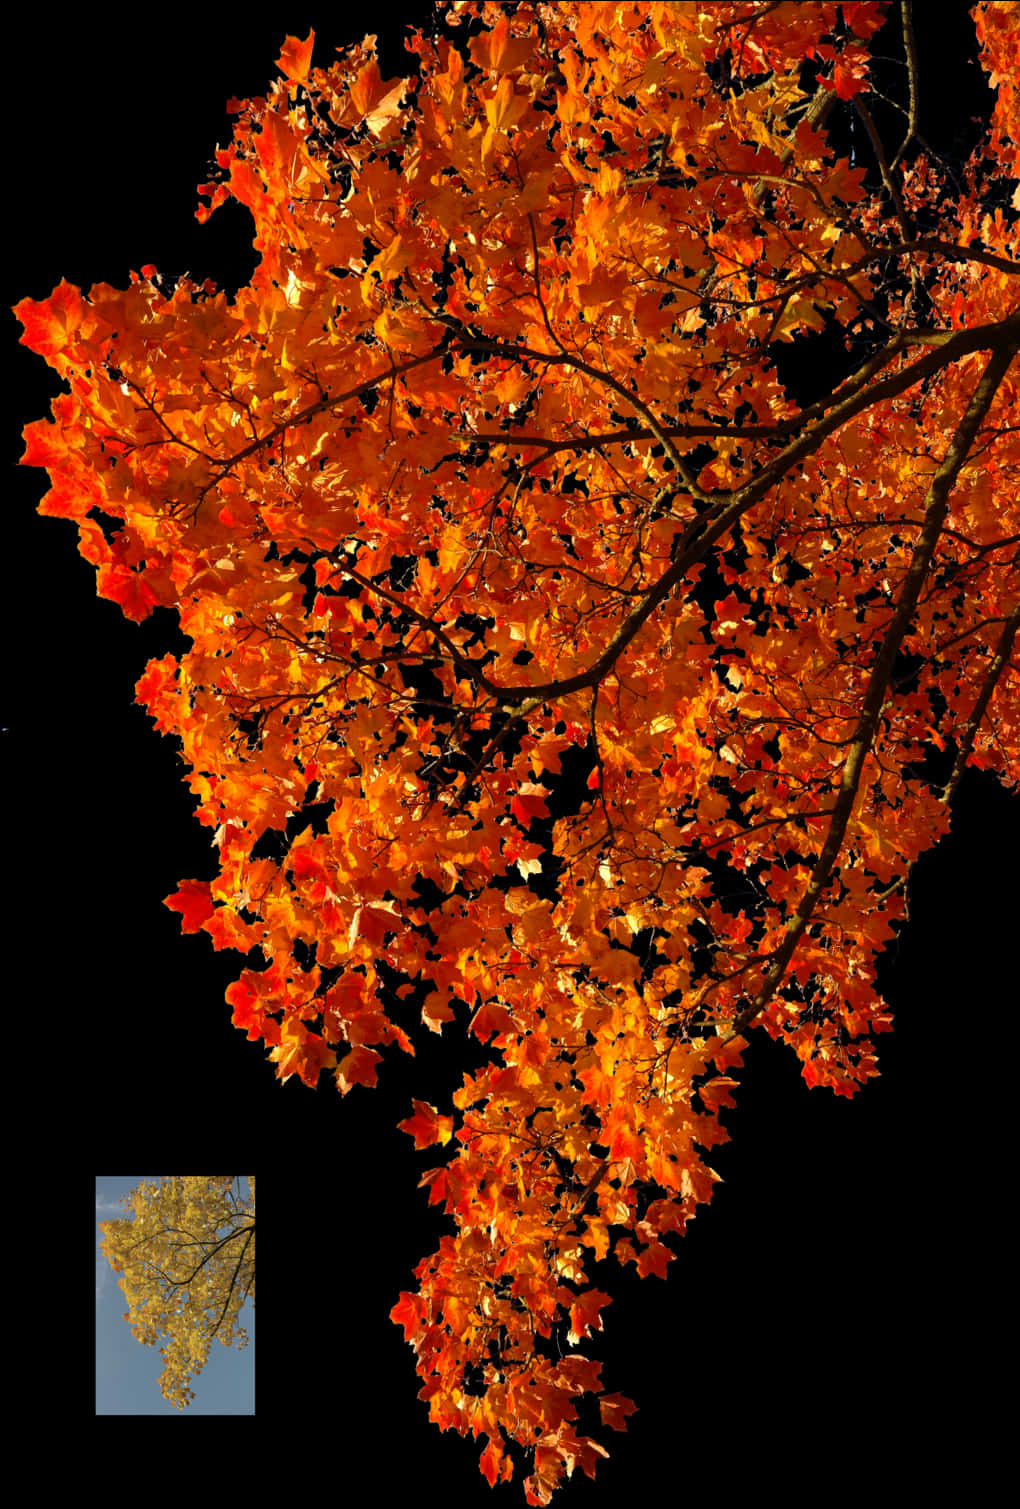 A Tree With Orange Leaves